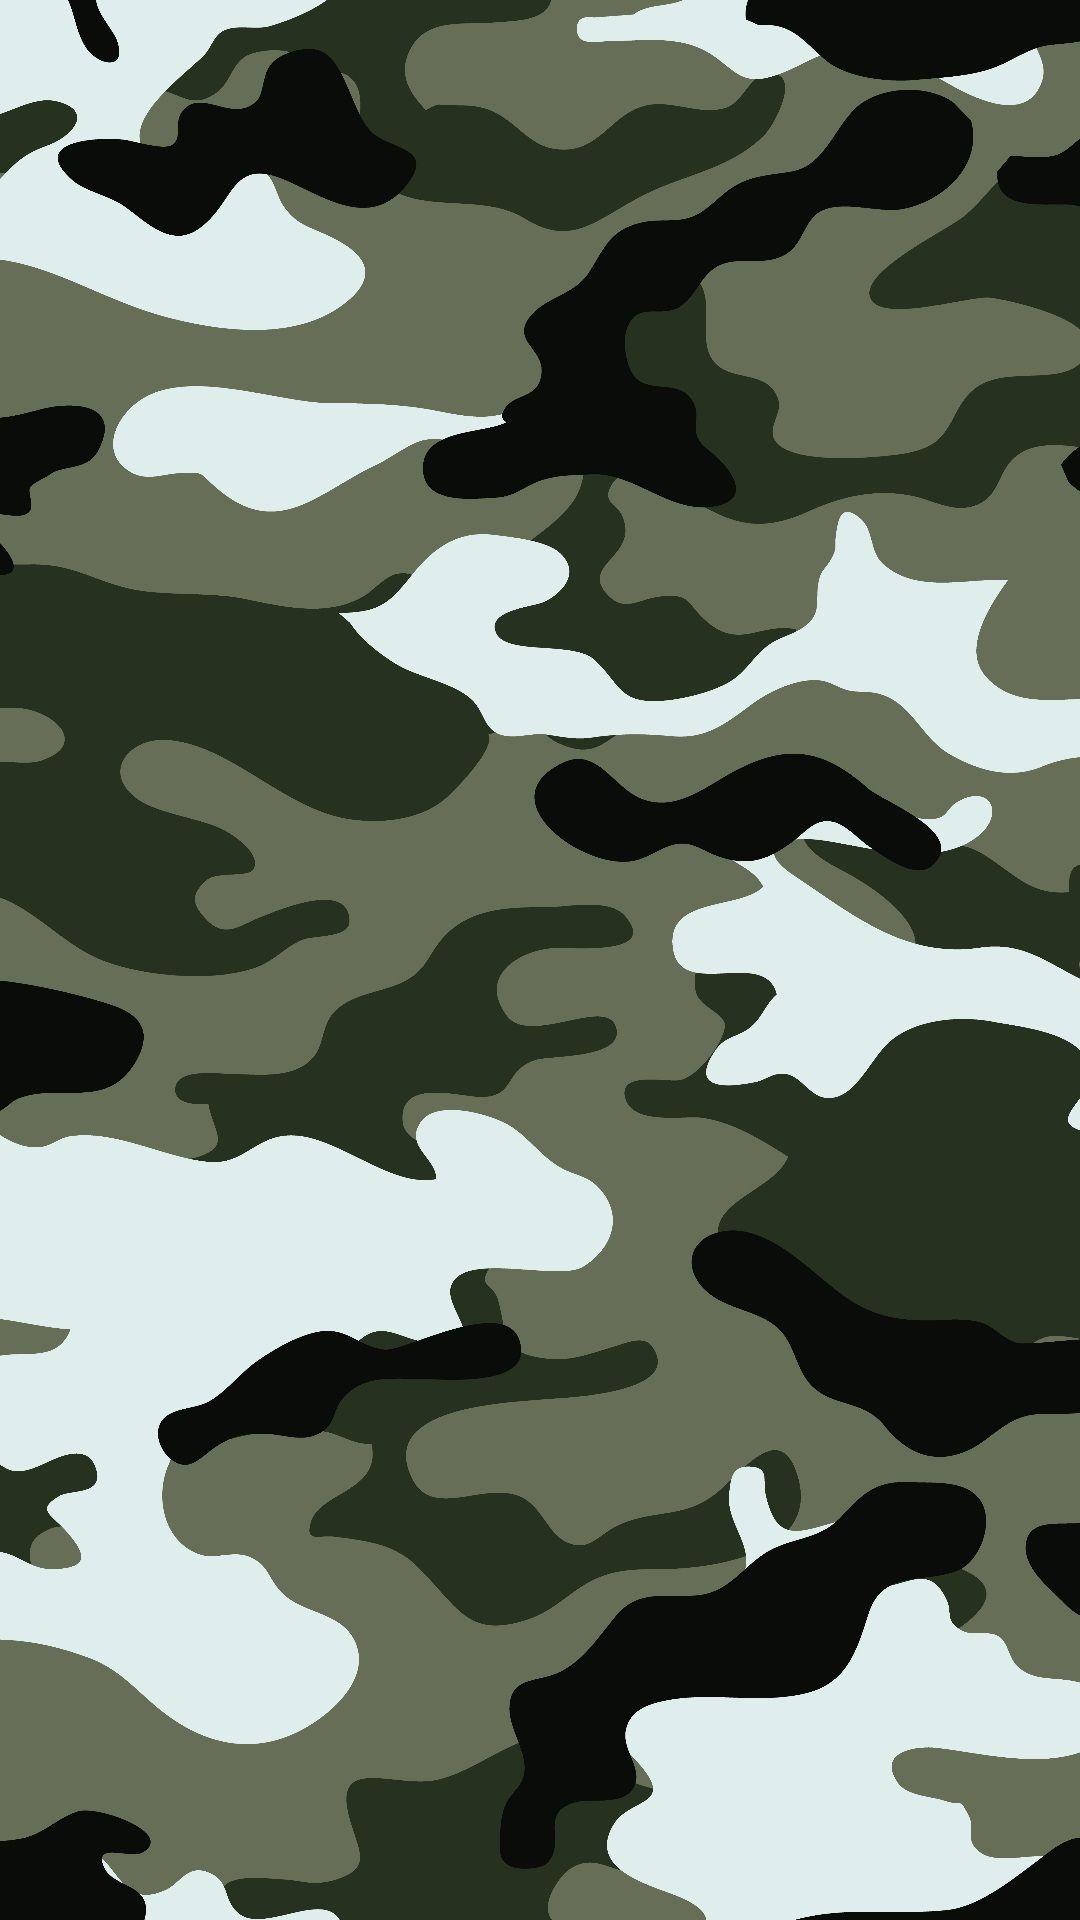 Camouflage wallpaper for iPhone or Android. Tags: camo, hunting